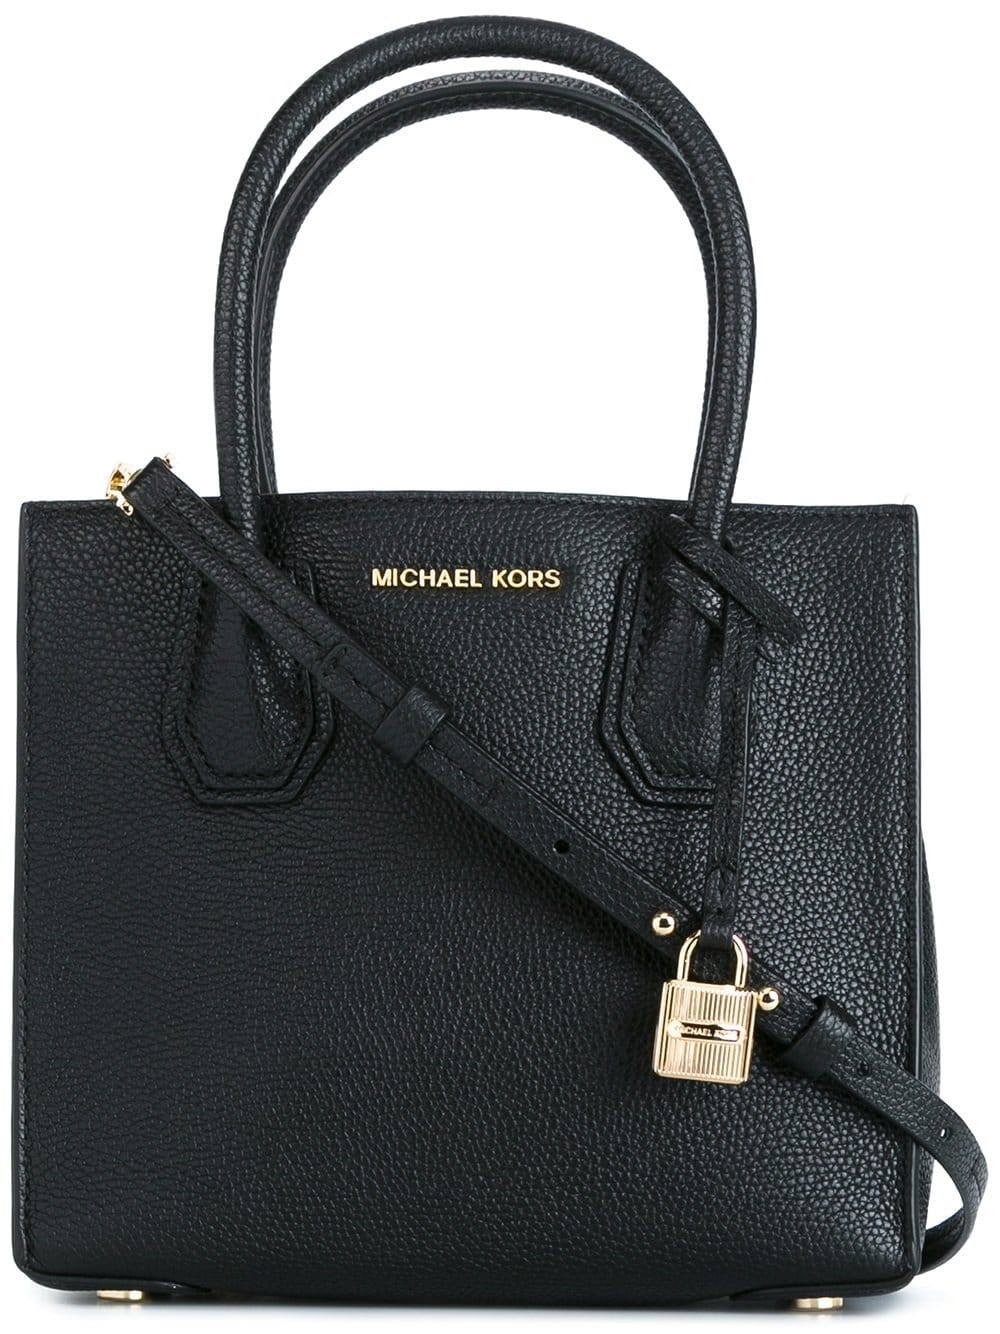 michael kors mk LOGO TOTE BAG WITH STRAP available on montiboutique.com